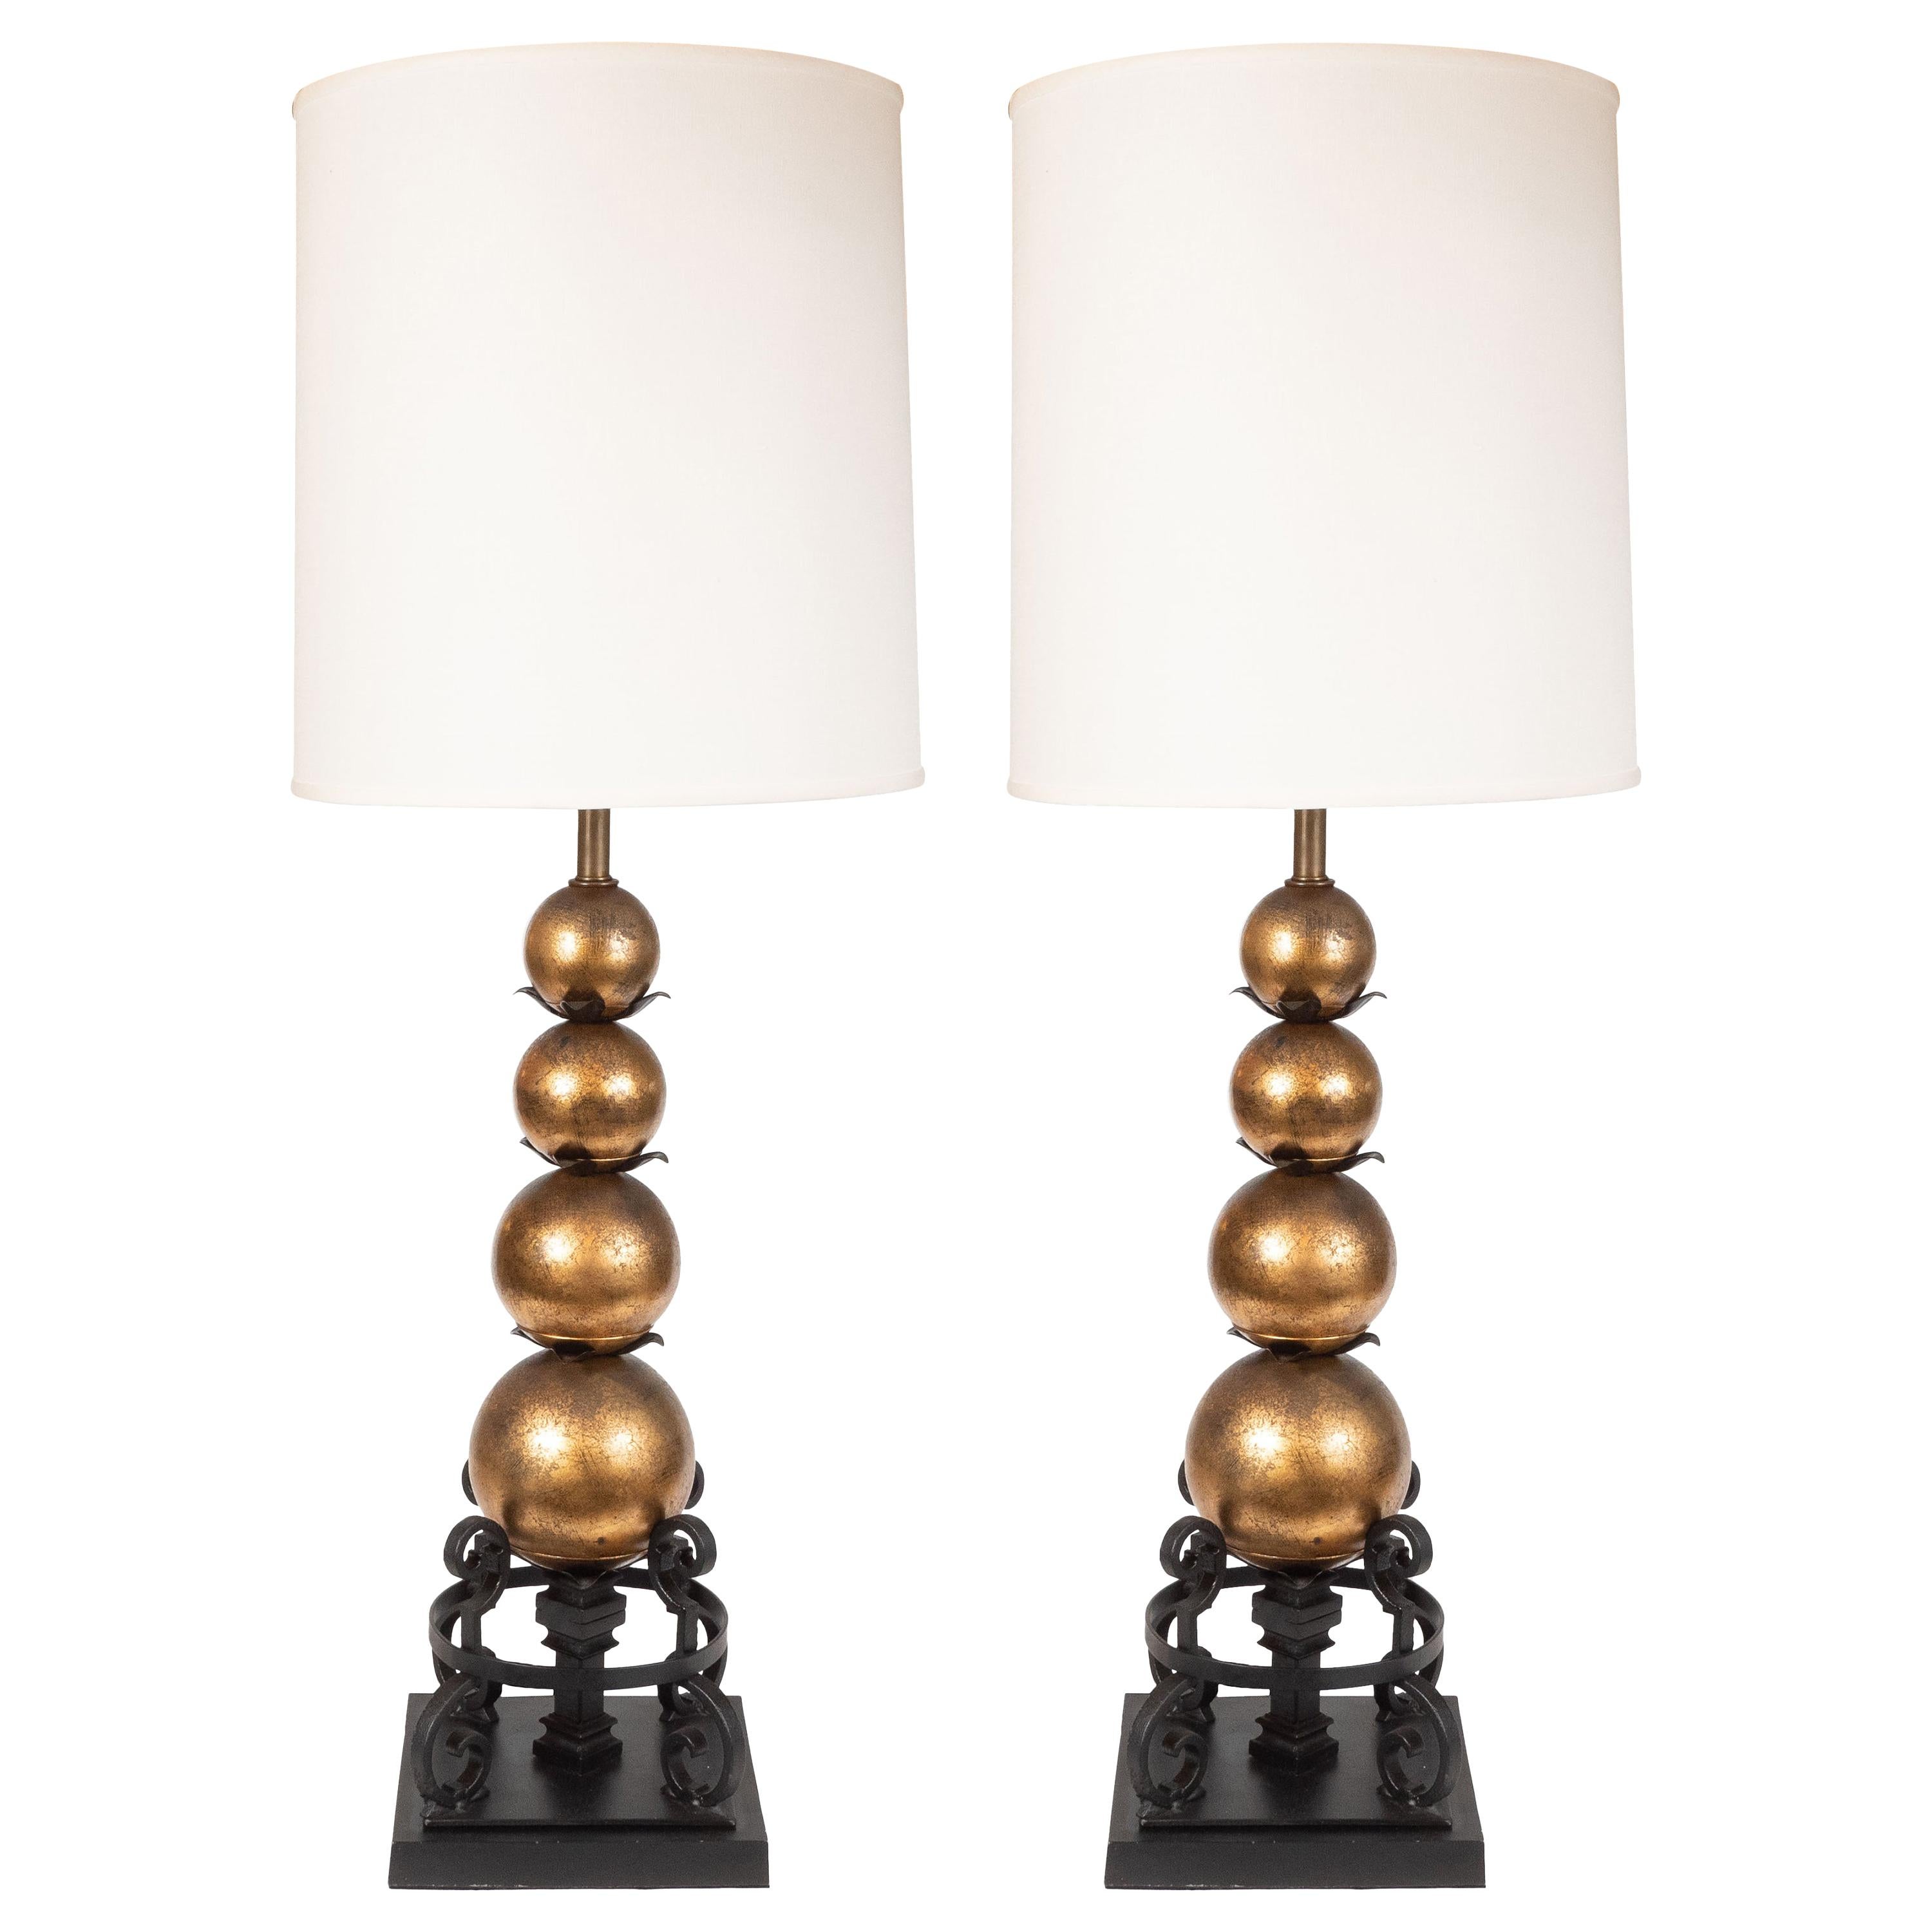 Pair of 1940s Gilded Spheres and Wrought Iron Spherical Art Moderne Table Lamps